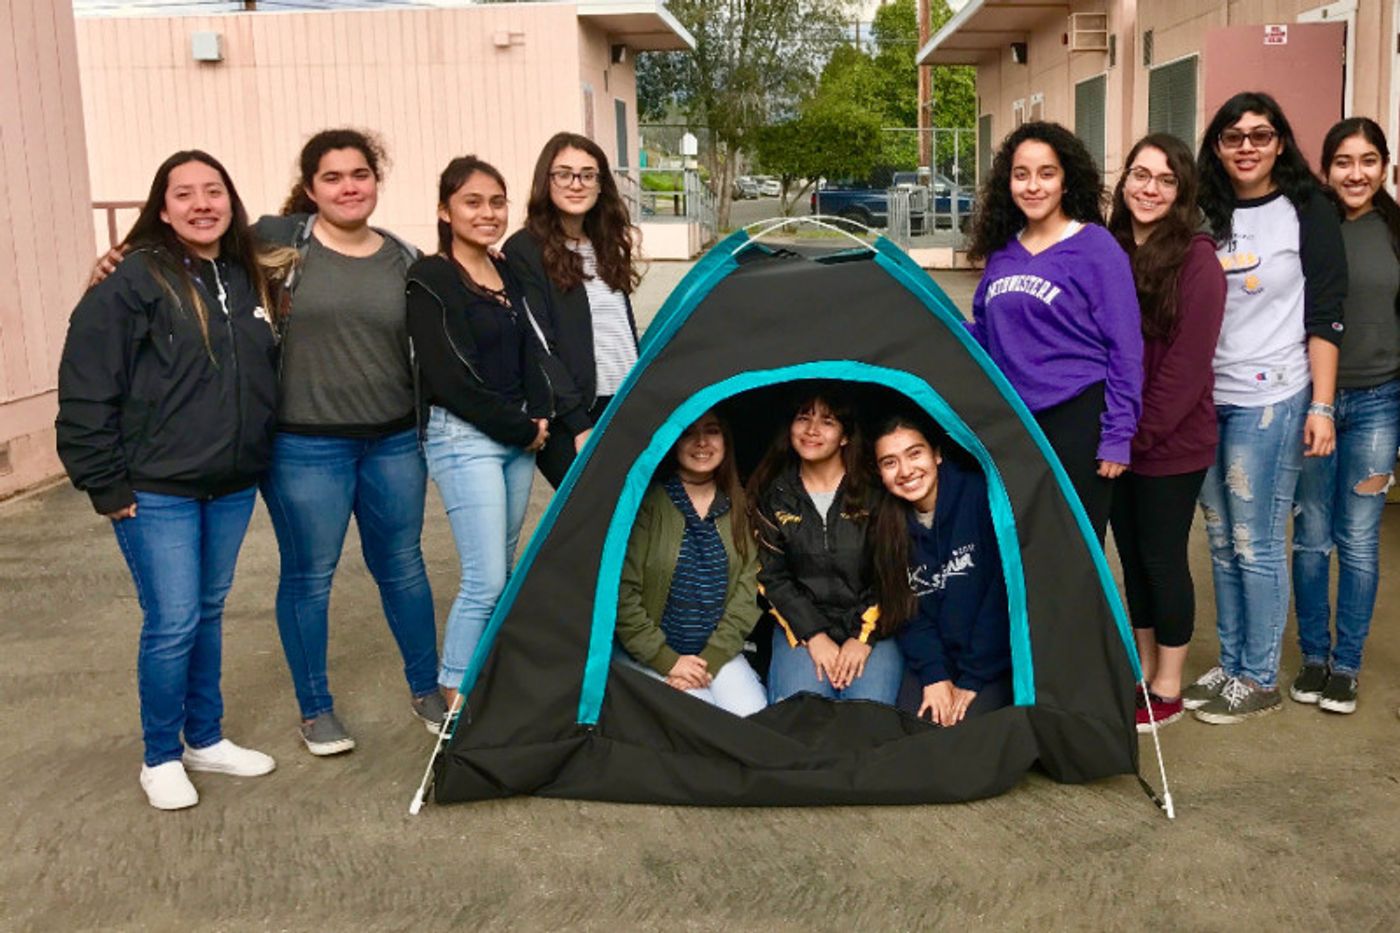 The girls show off their solar-powered tent. Source: GoFundMe